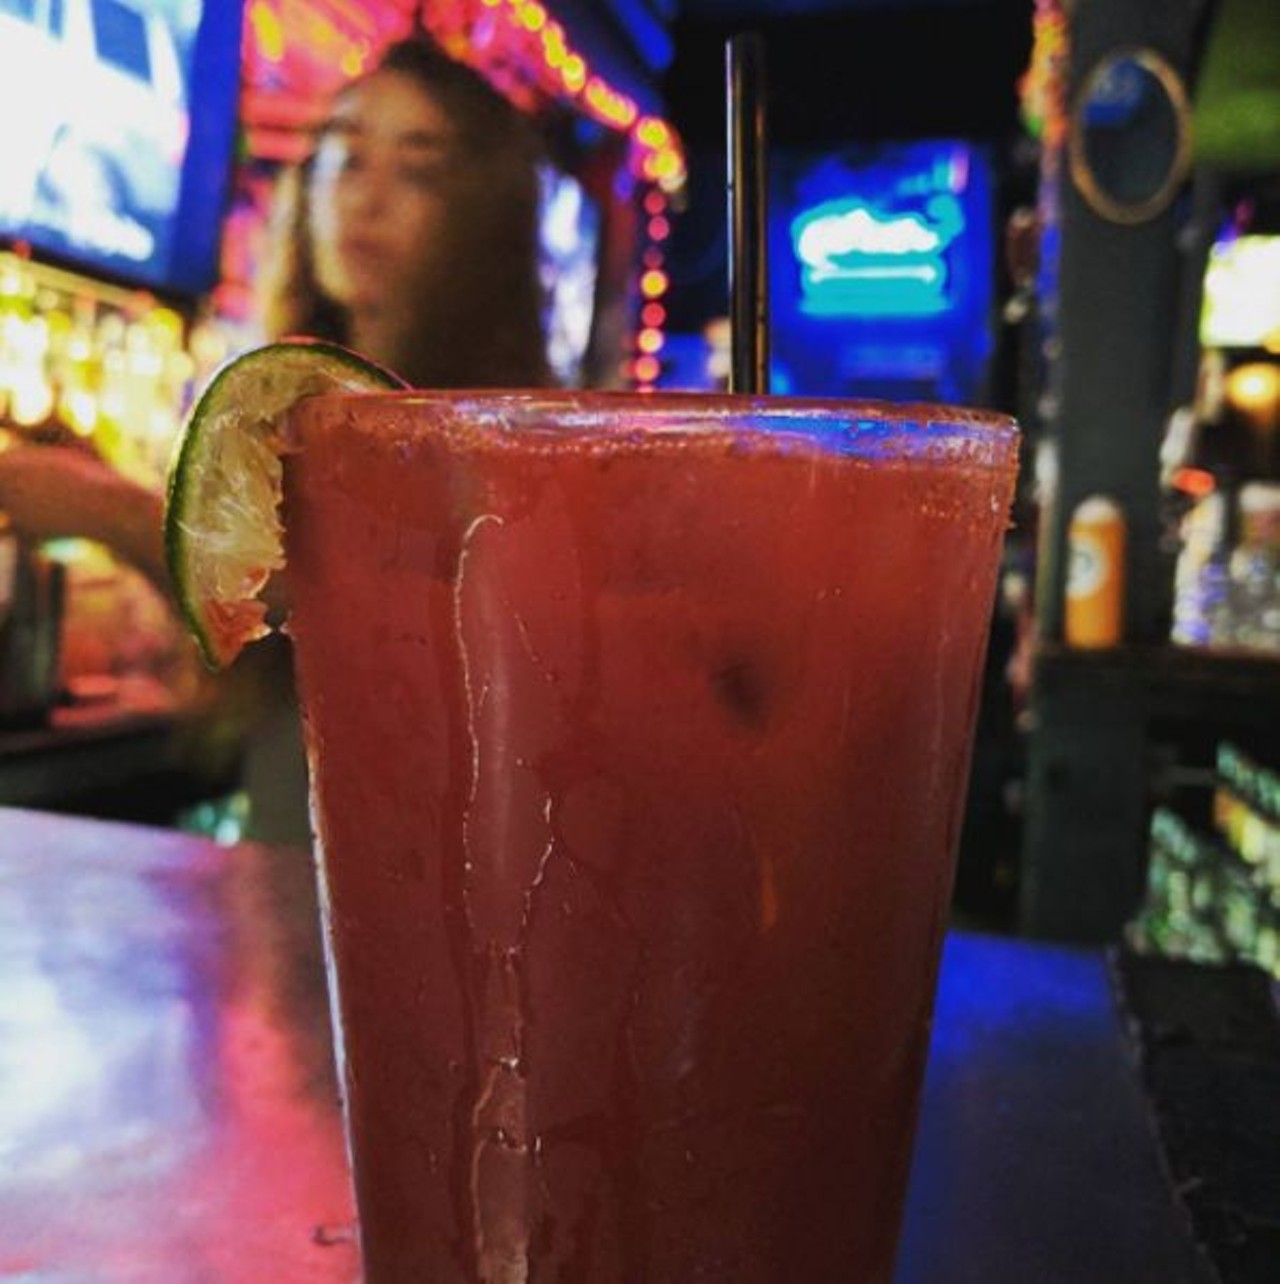 Club Sirius
228 Losoya St.,  (210) 643-6650
Just a few steps from the Riverwalk, Club Sirius gets packed fast. Squeeze your way in for cool specials on just about everything. 
Photo via Instagram, branrec_yoself